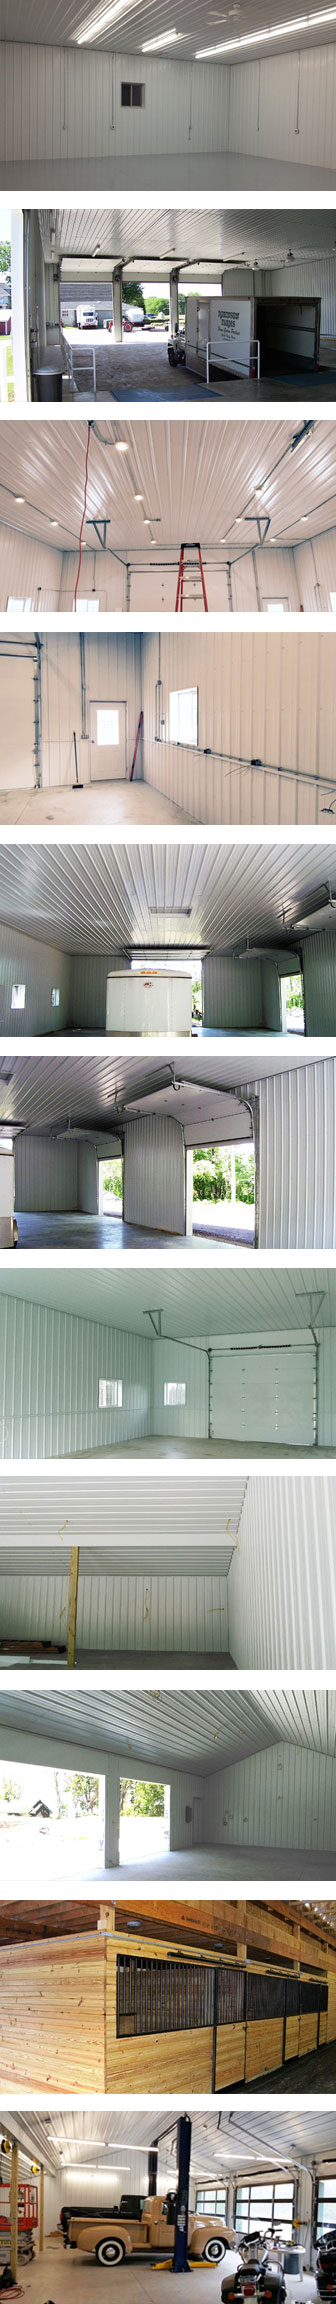 pole barn interior packages